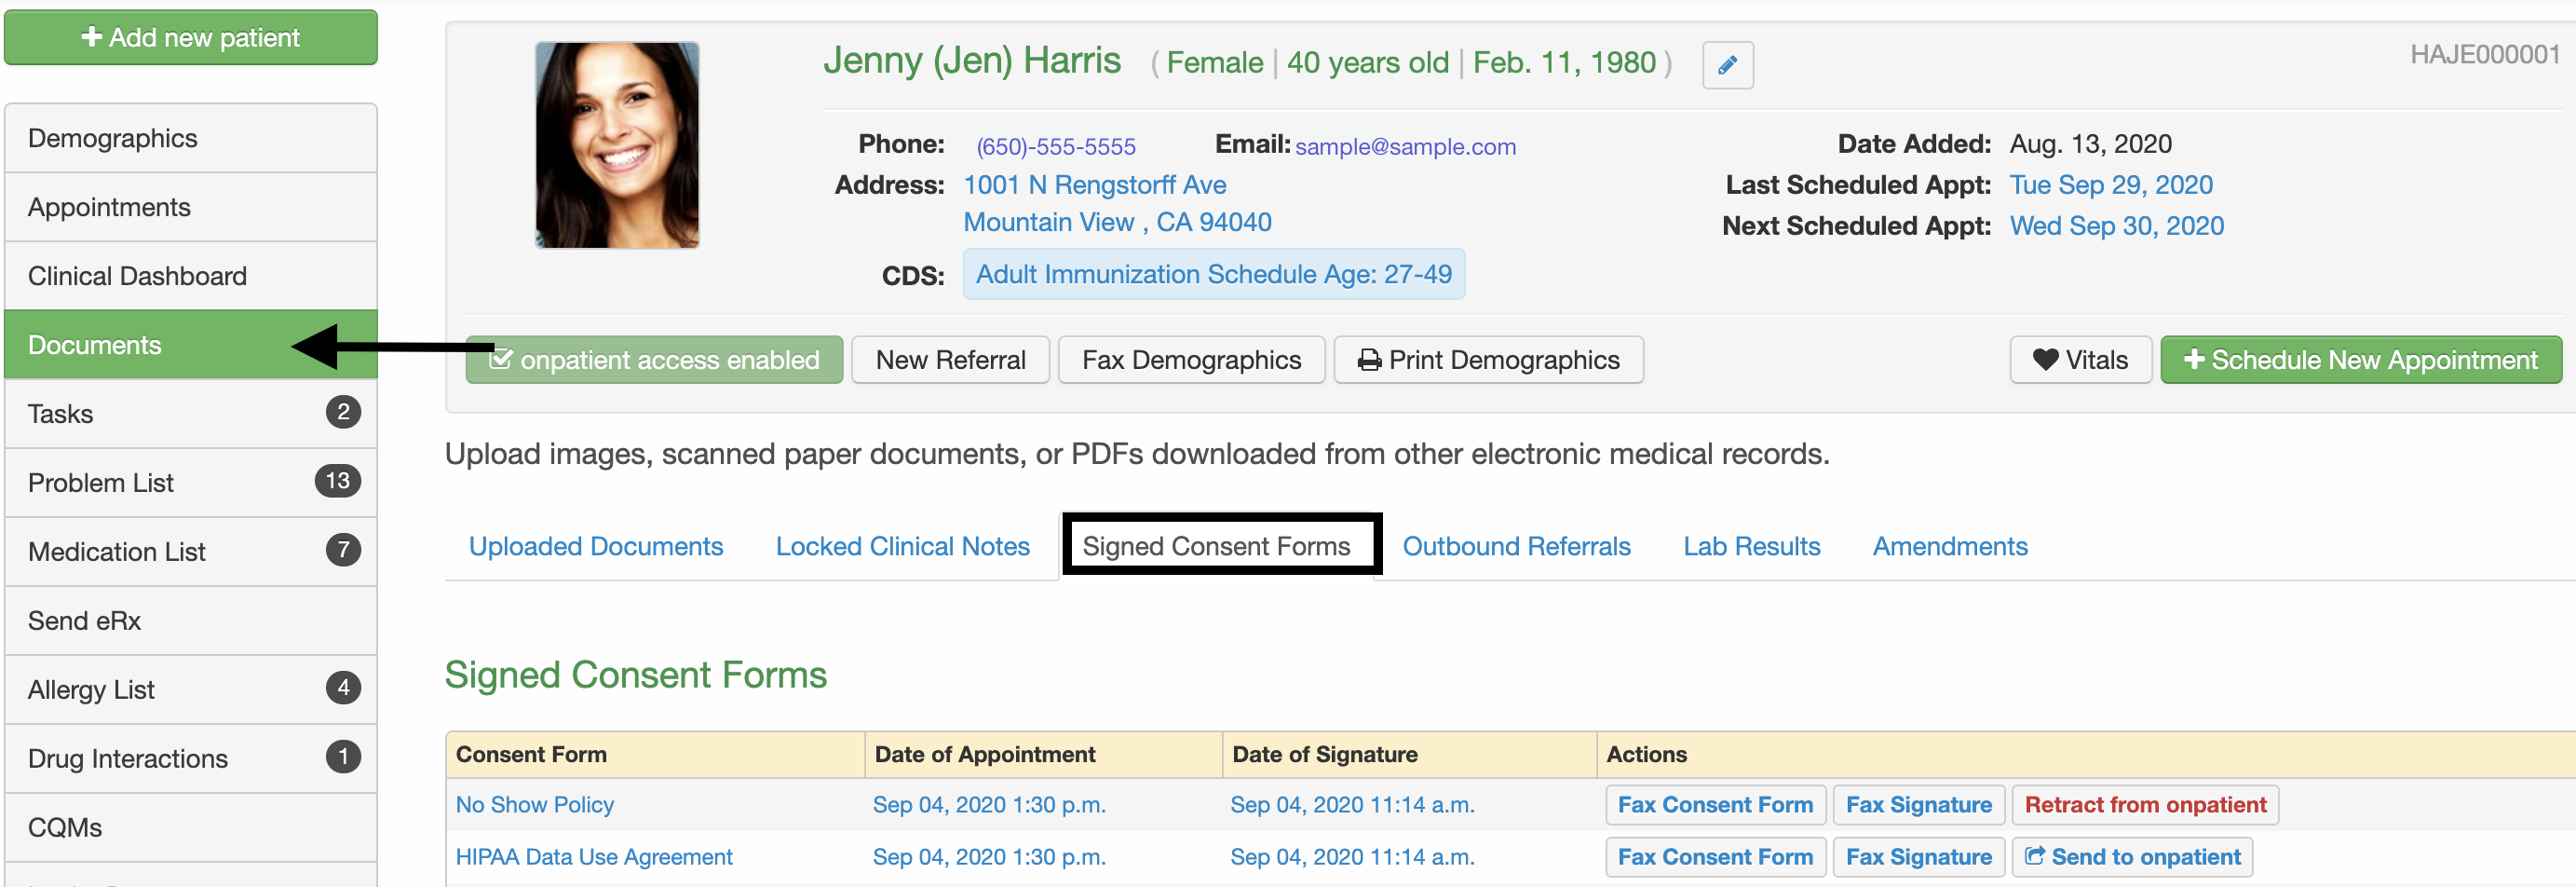 Patient_Chart_Documents-Signed_Consent_Forms.png